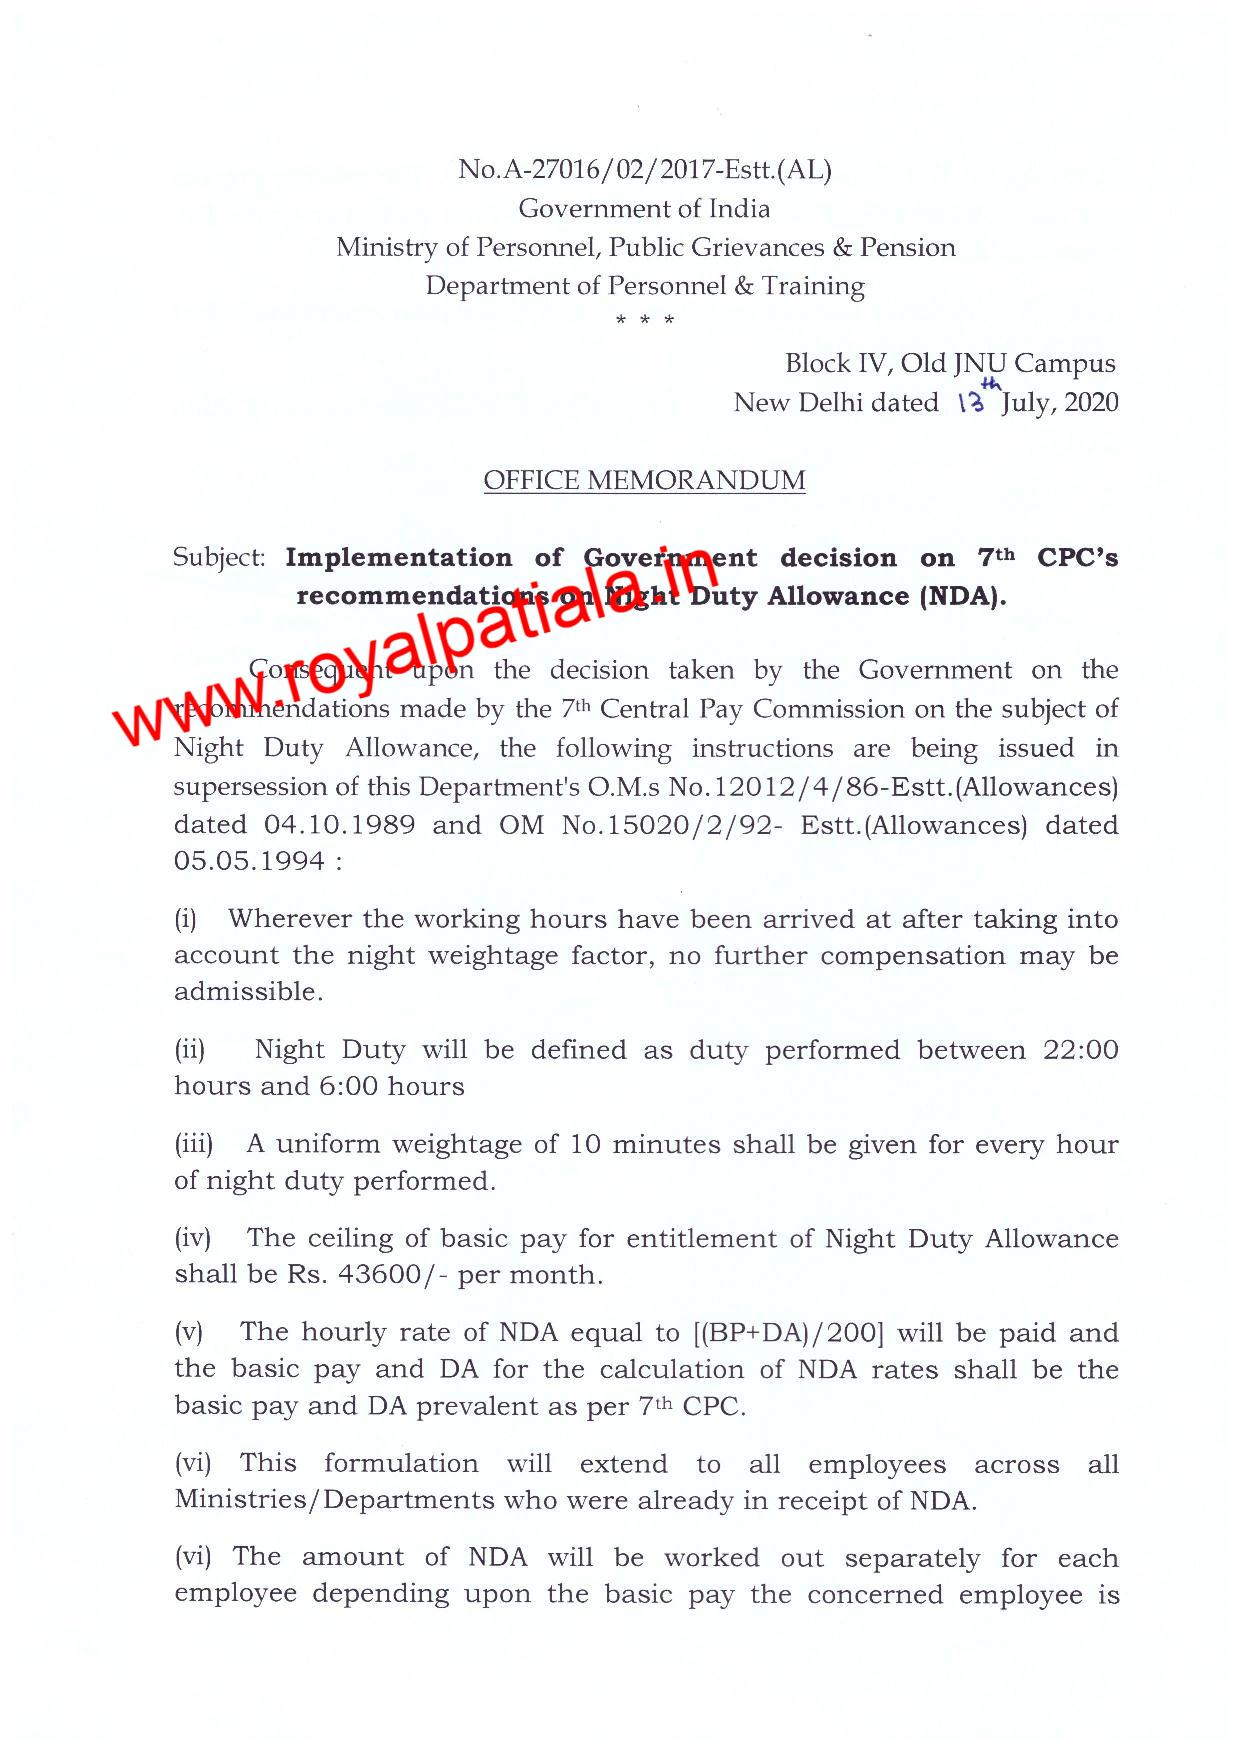 Good news for Central Government Employees; govt changes Night Duty Allowance rules